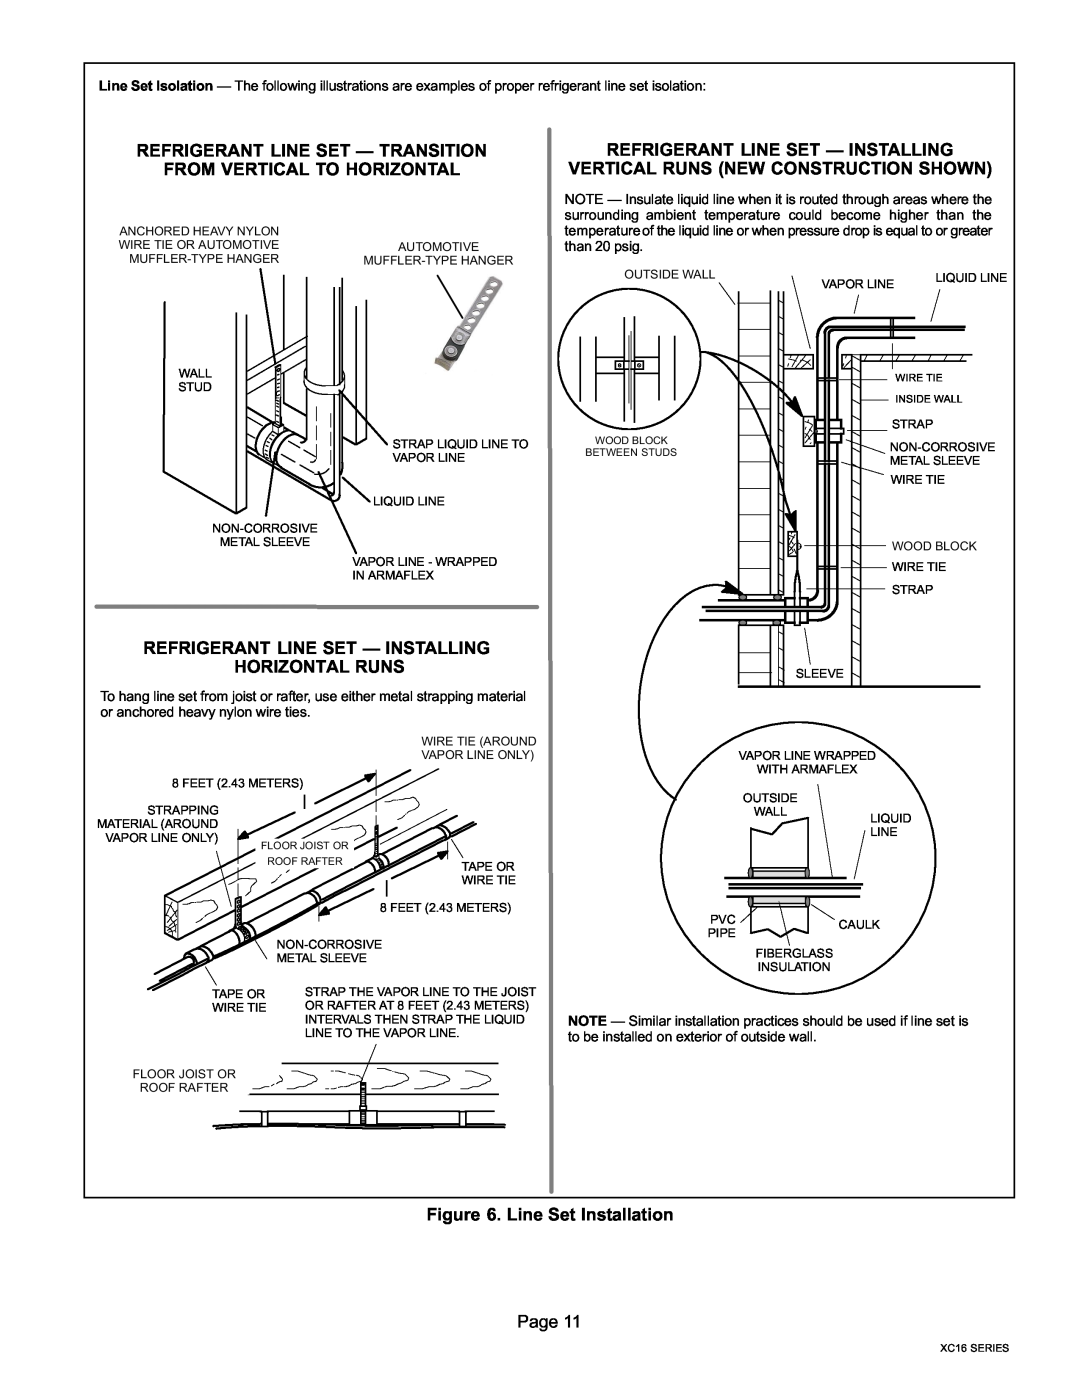 Lenox Elite Series X16 Air Conditioner Units Refrigerant Line Set From Vertical To Horizontal, Line Set Installation Page 